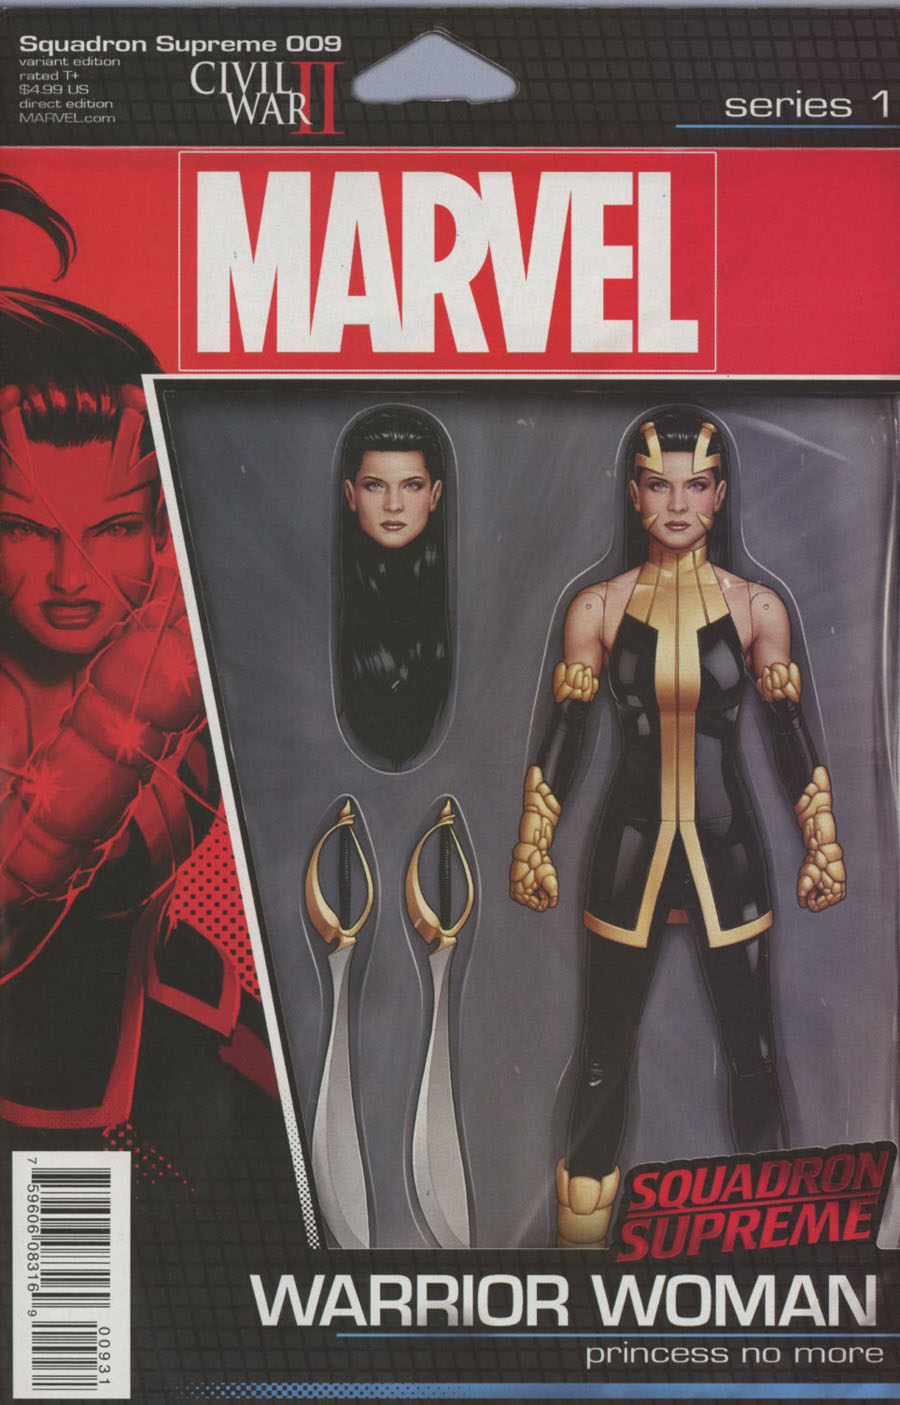 Squadron Supreme Vol 4 #9 Cover B Variant John Tyler Christopher Action Figure Cover (Civil War II Tie-In)